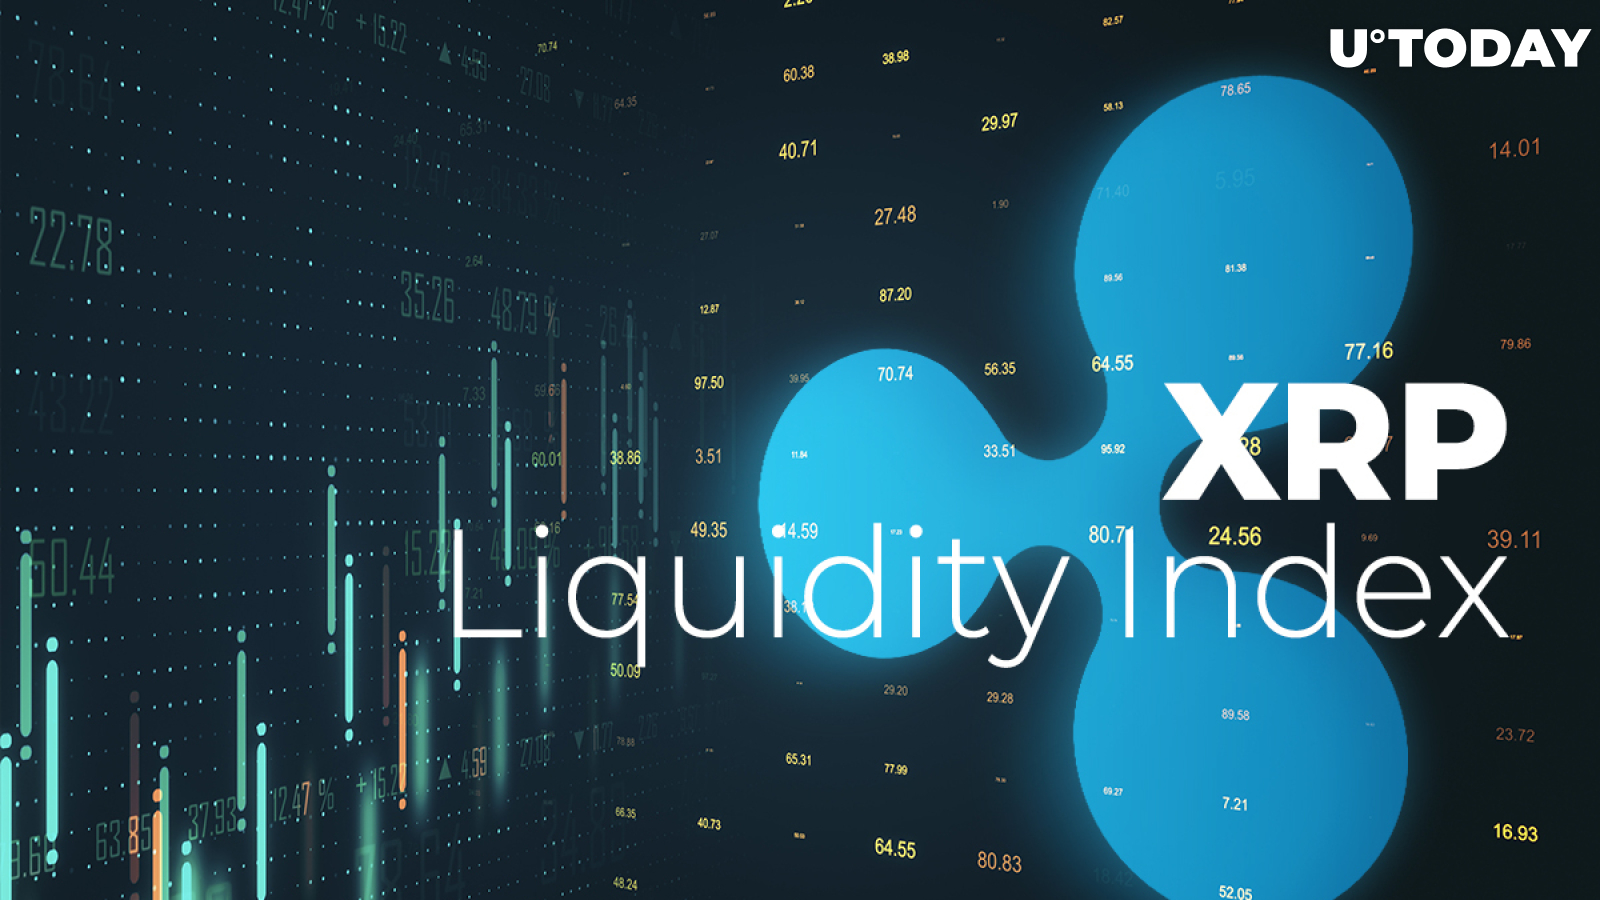 XRP Liquidity Index Surges Past 9 Mln, Leaving Previous All-Time High Behind